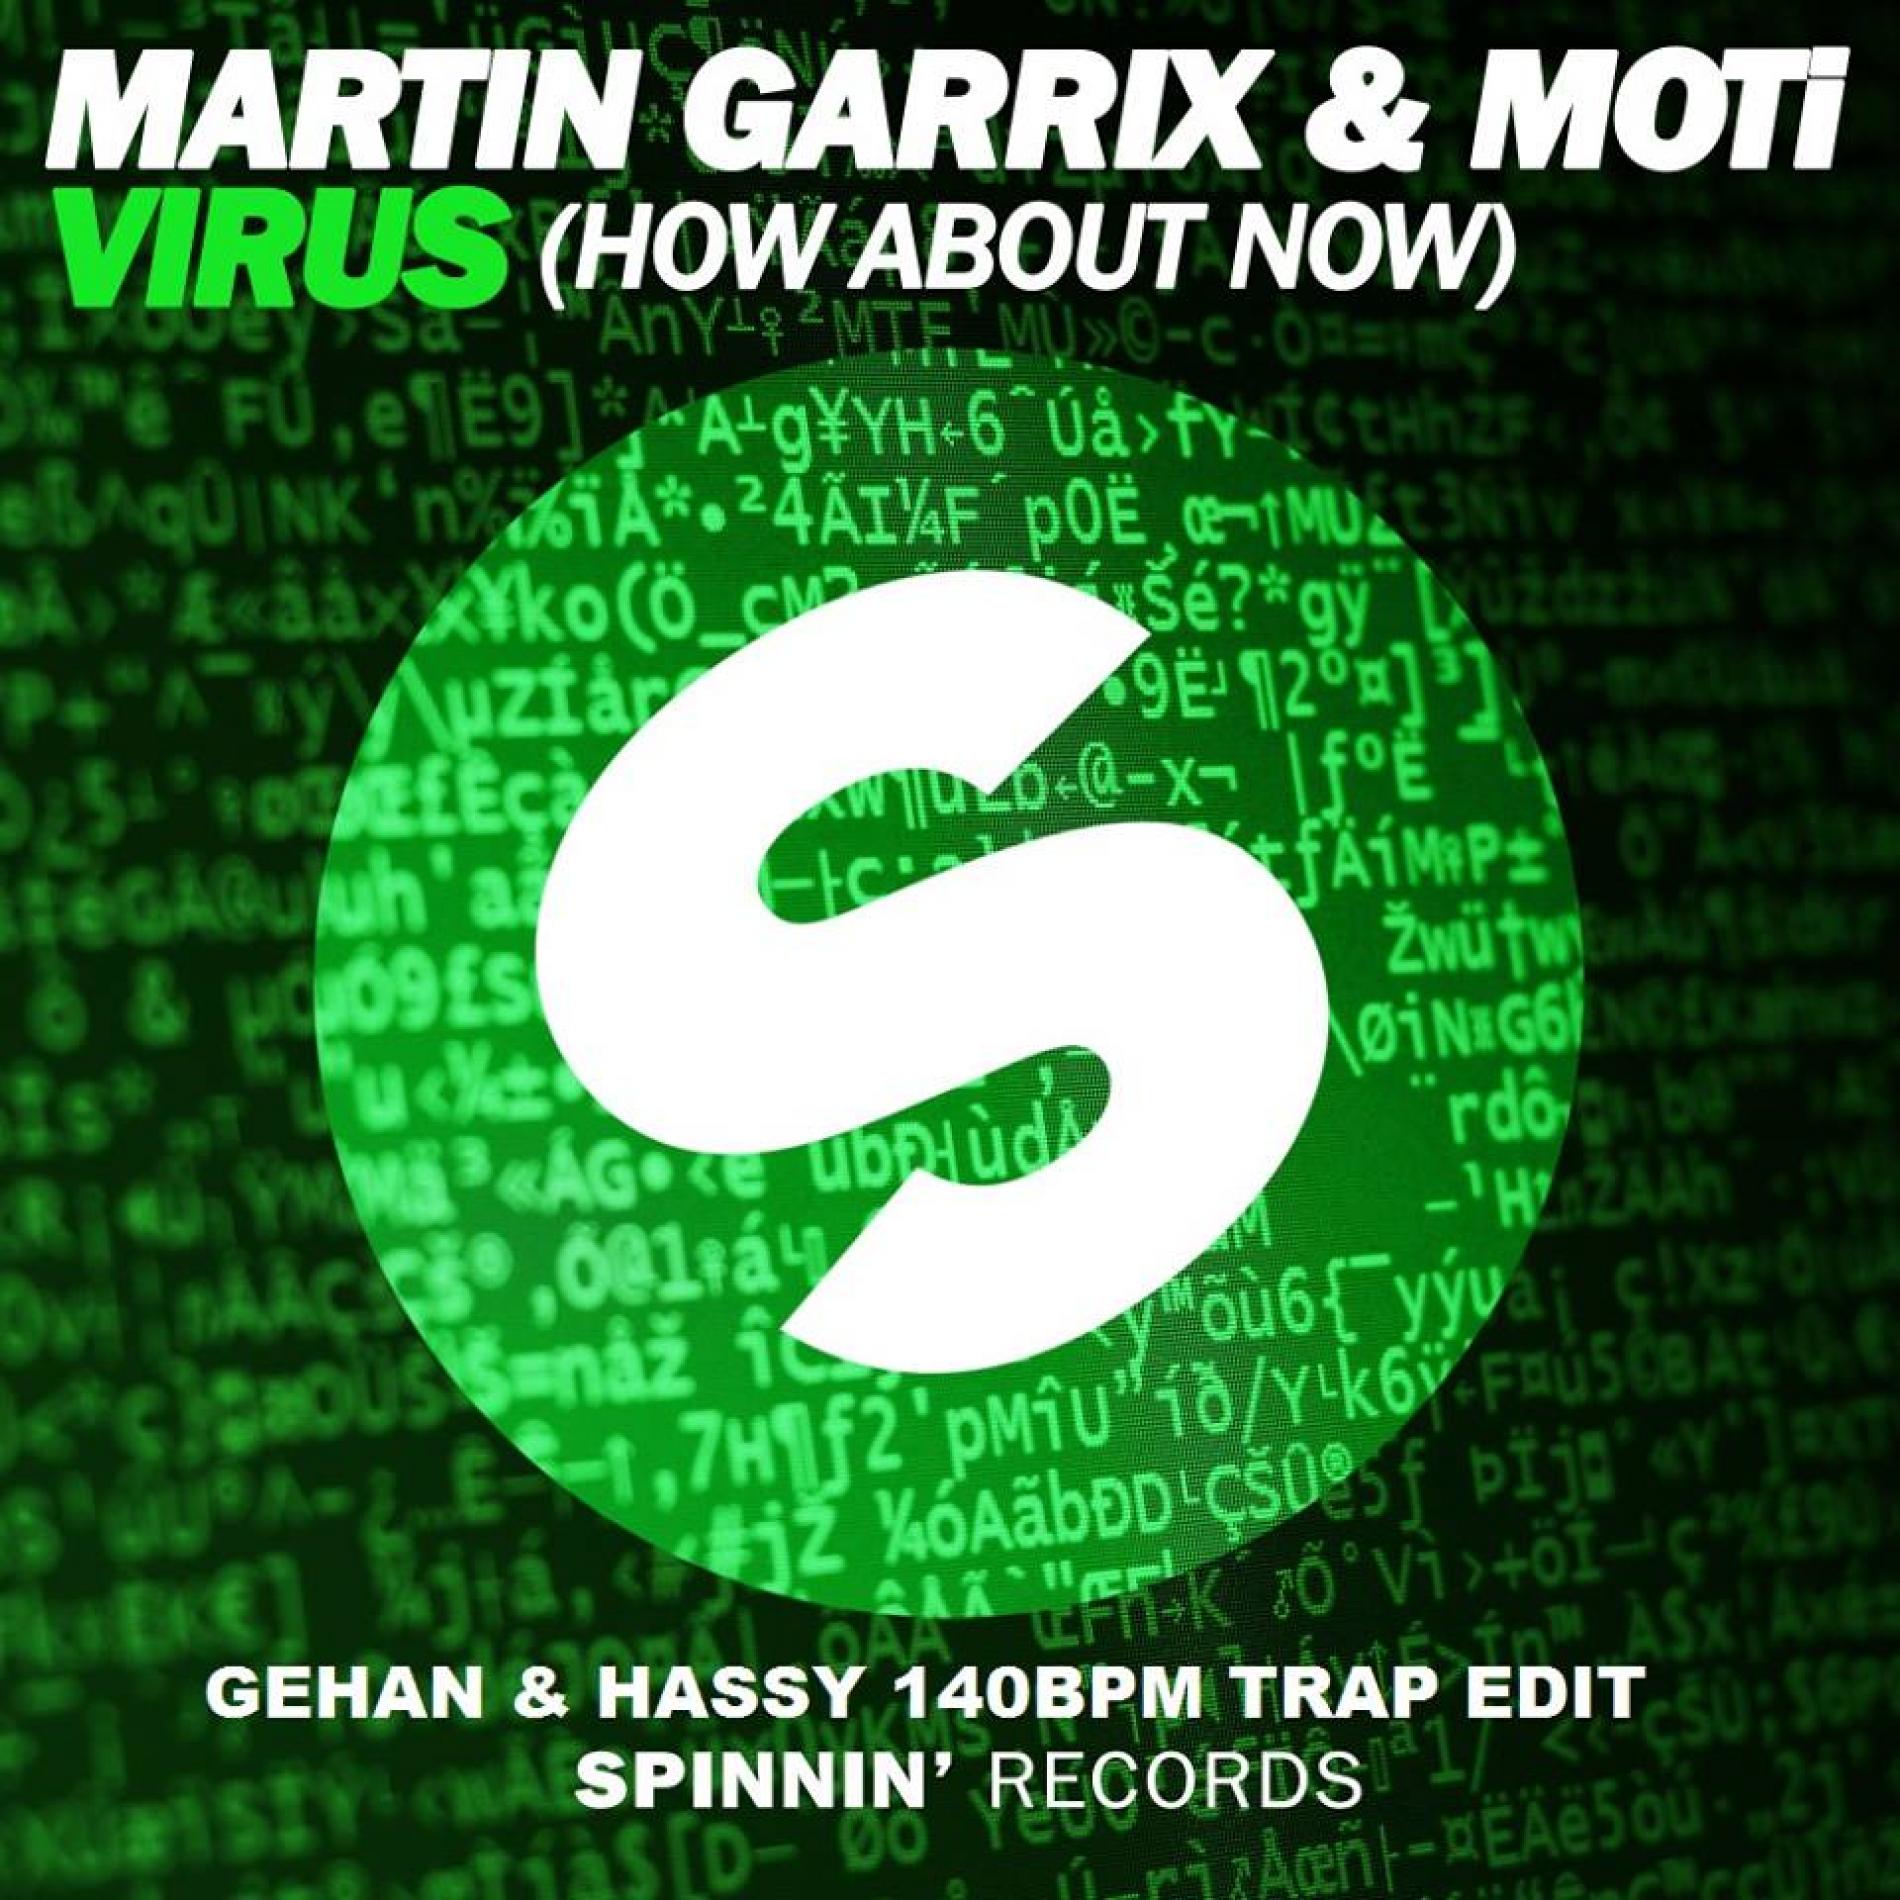 Gehan & Hassy – Virus (How About Now) (140BPM Trap Edit)